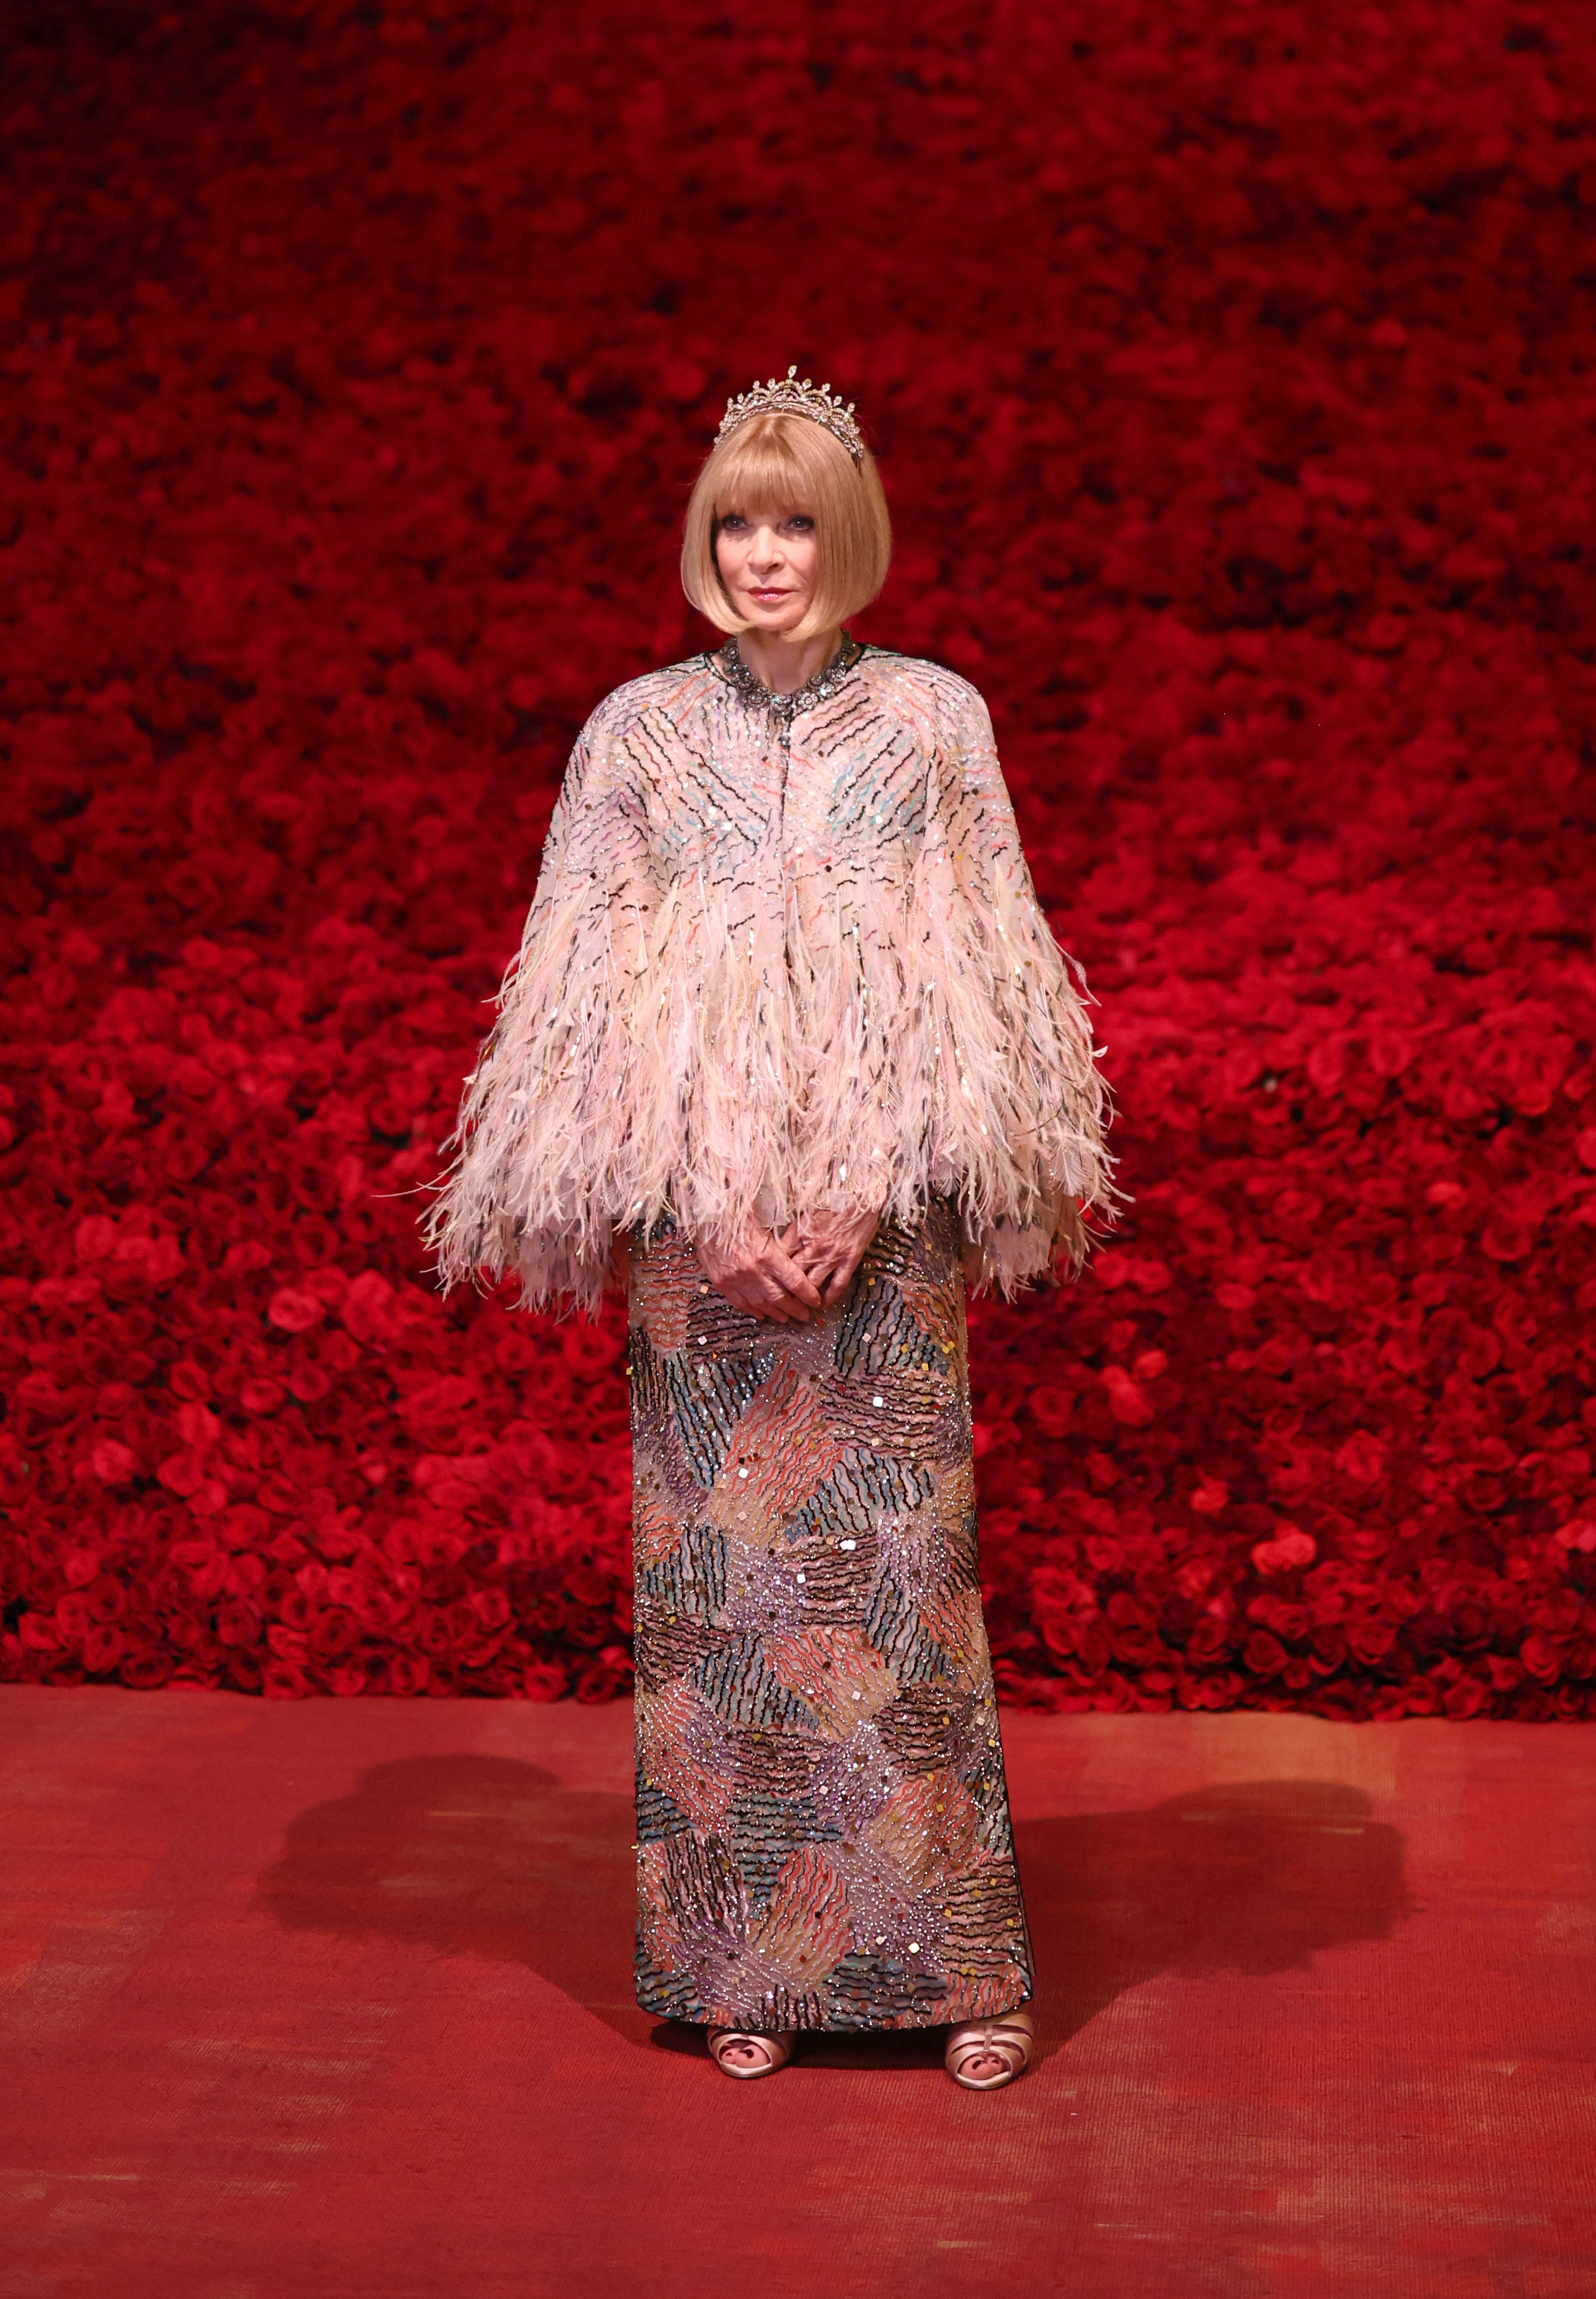 Anna Wintour attends The Met Gala Celebrating "In America: An Anthology of Fashion" at The Metropolitan Museum of Art in New York City, on May 2, 2022. | Source: Getty Images